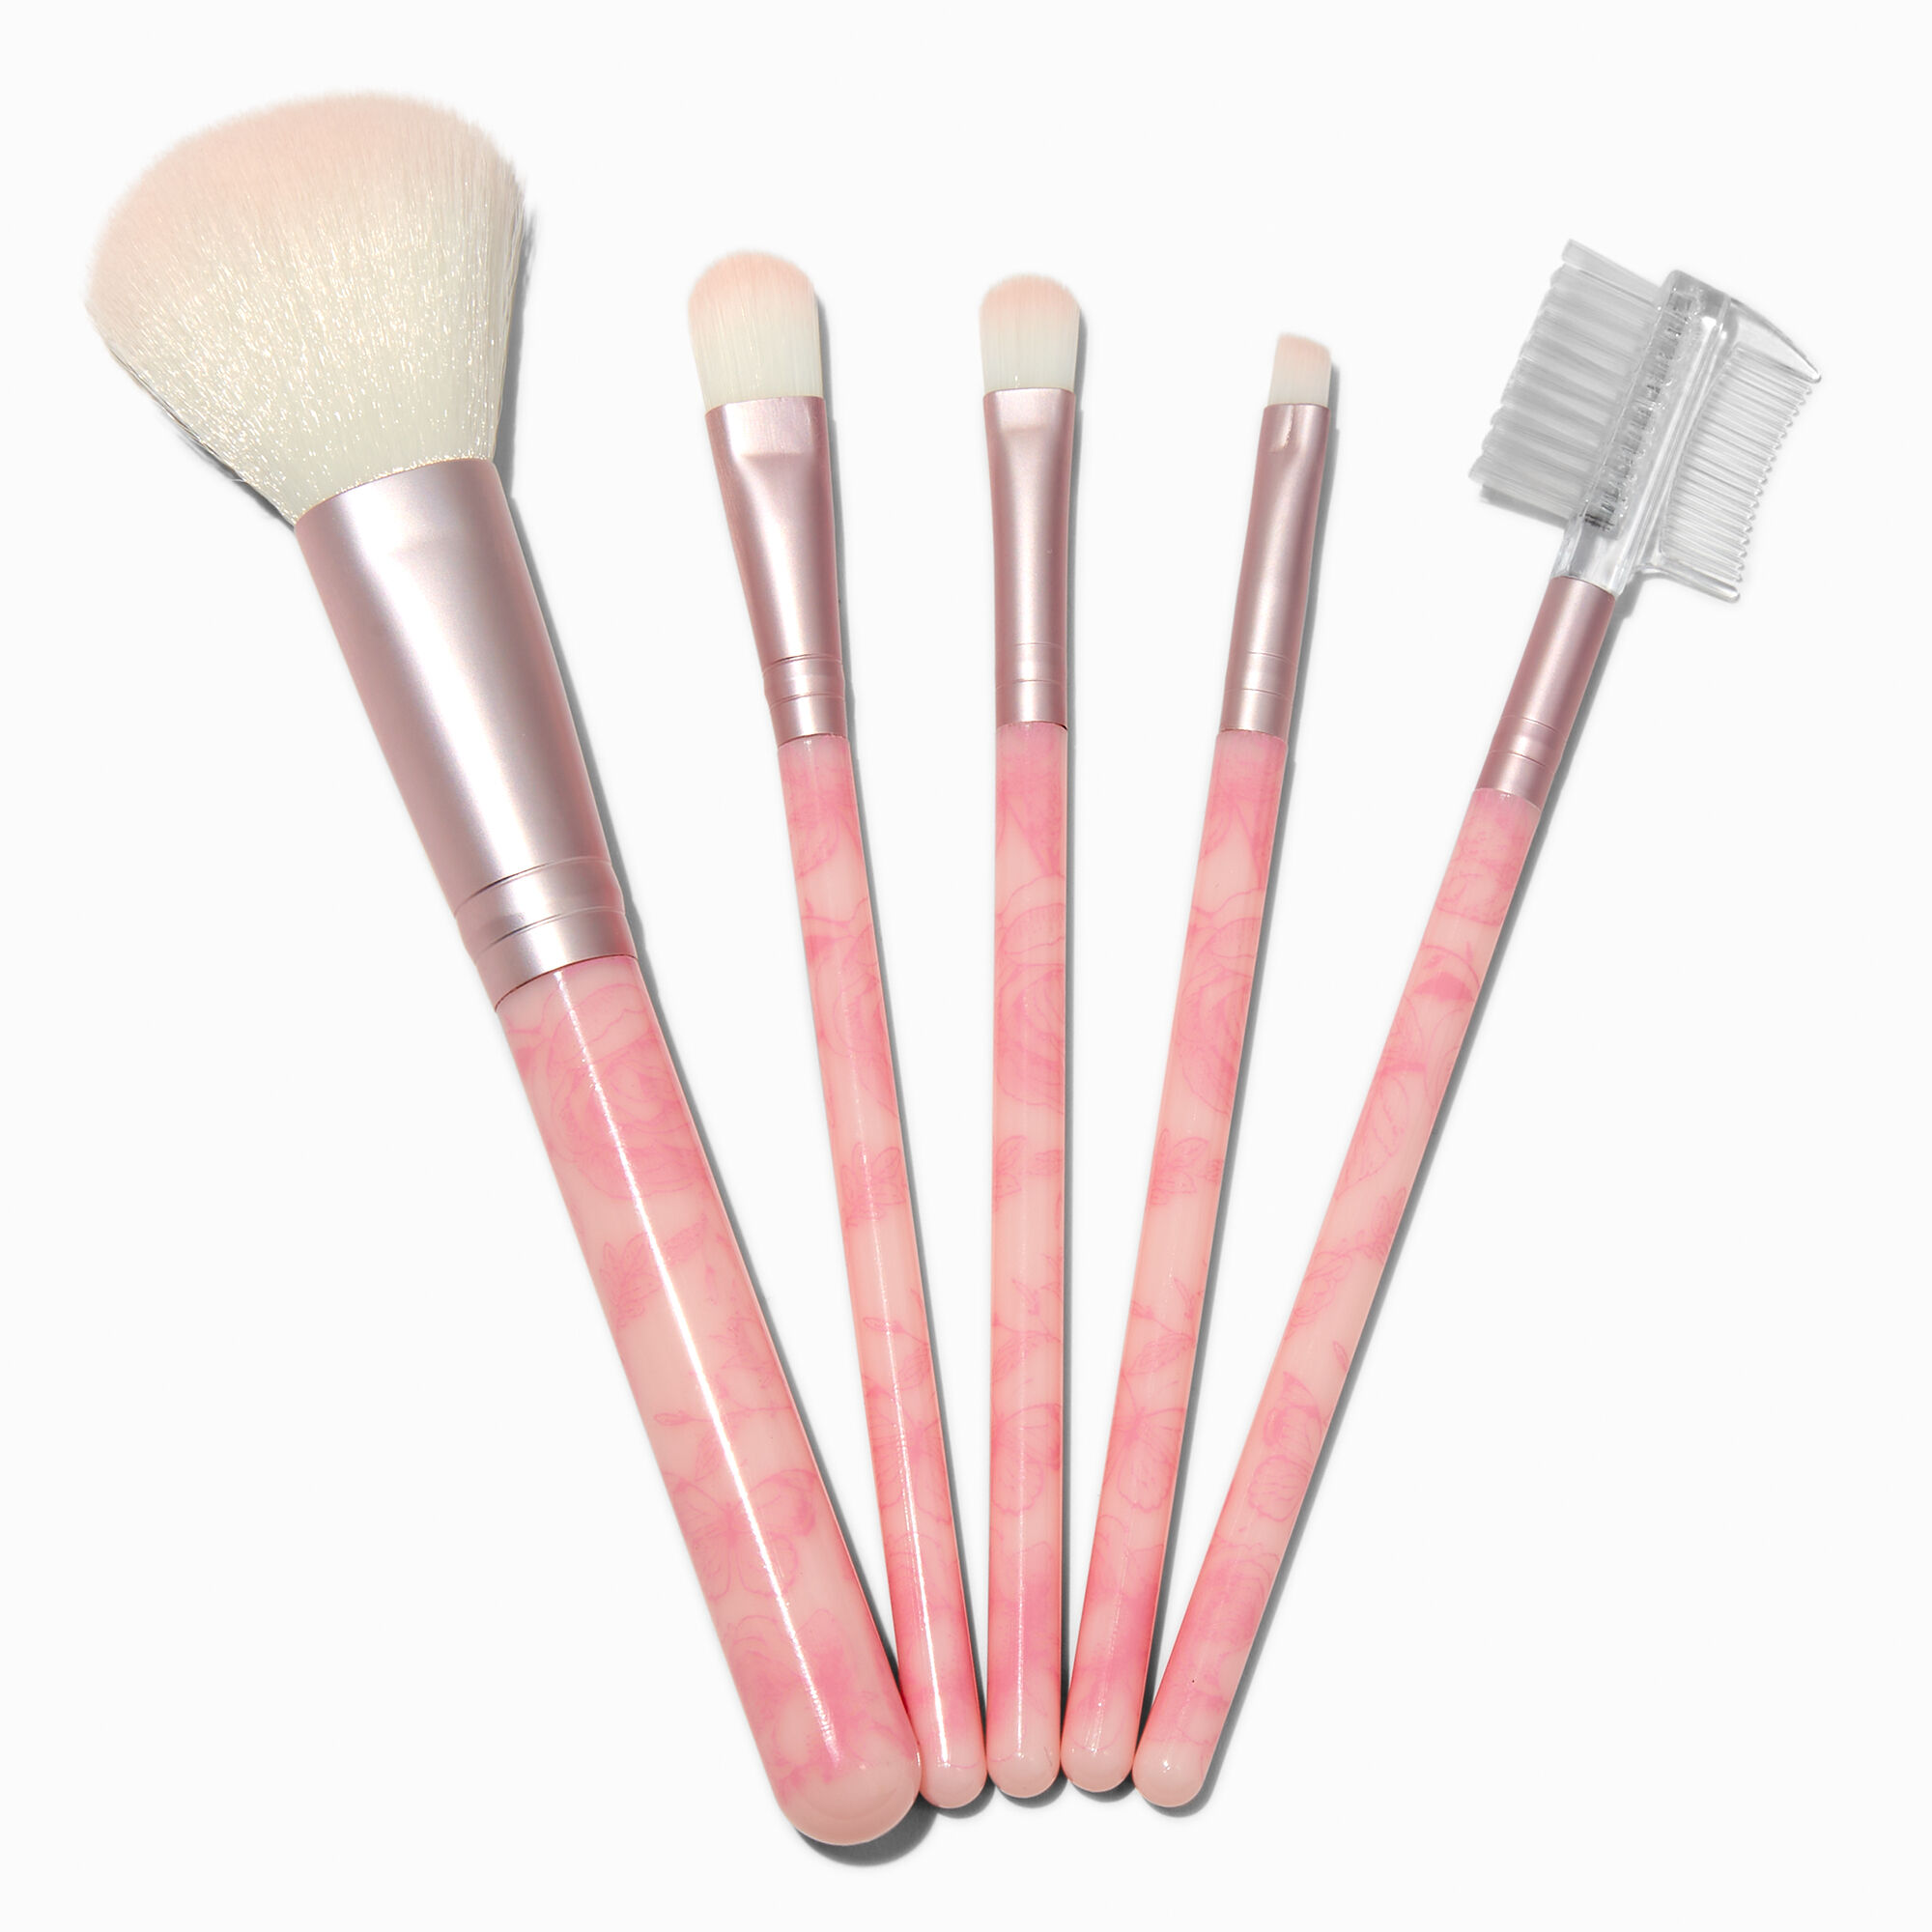 View Claires Floral Makeup Brush Set 5 Pack Pink information